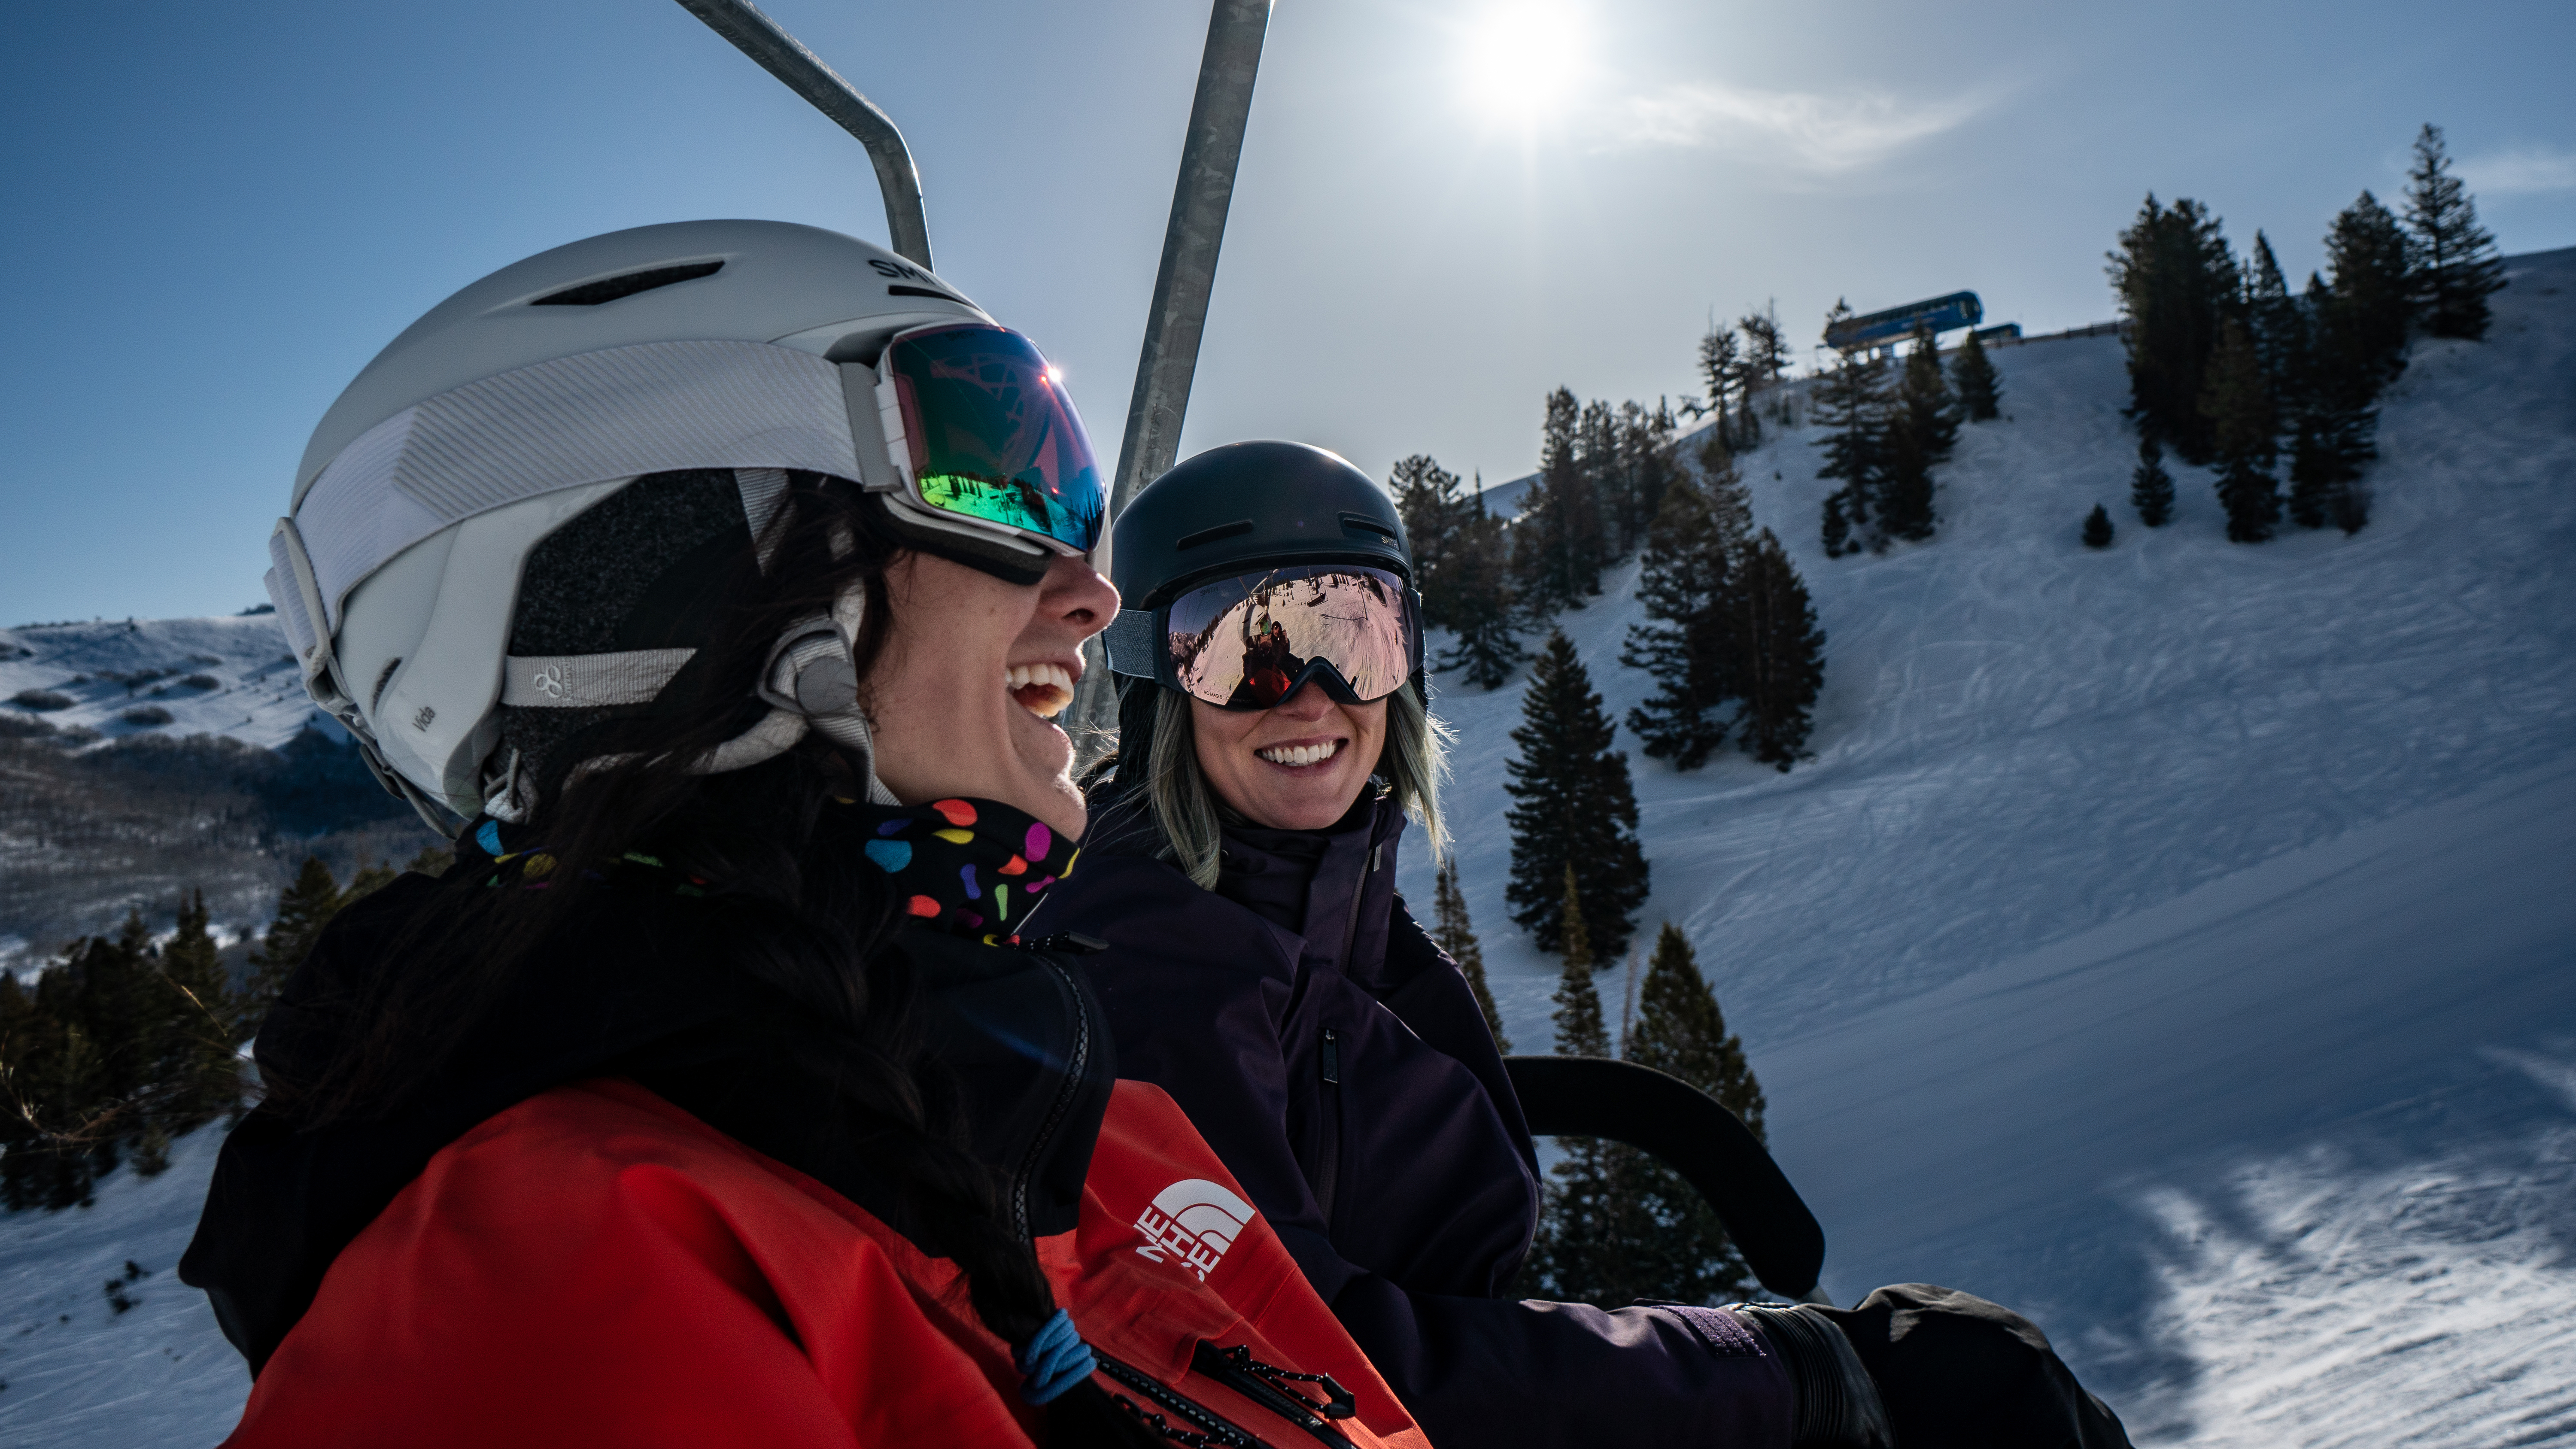 Two friends on the chairlift laughing and having a good time